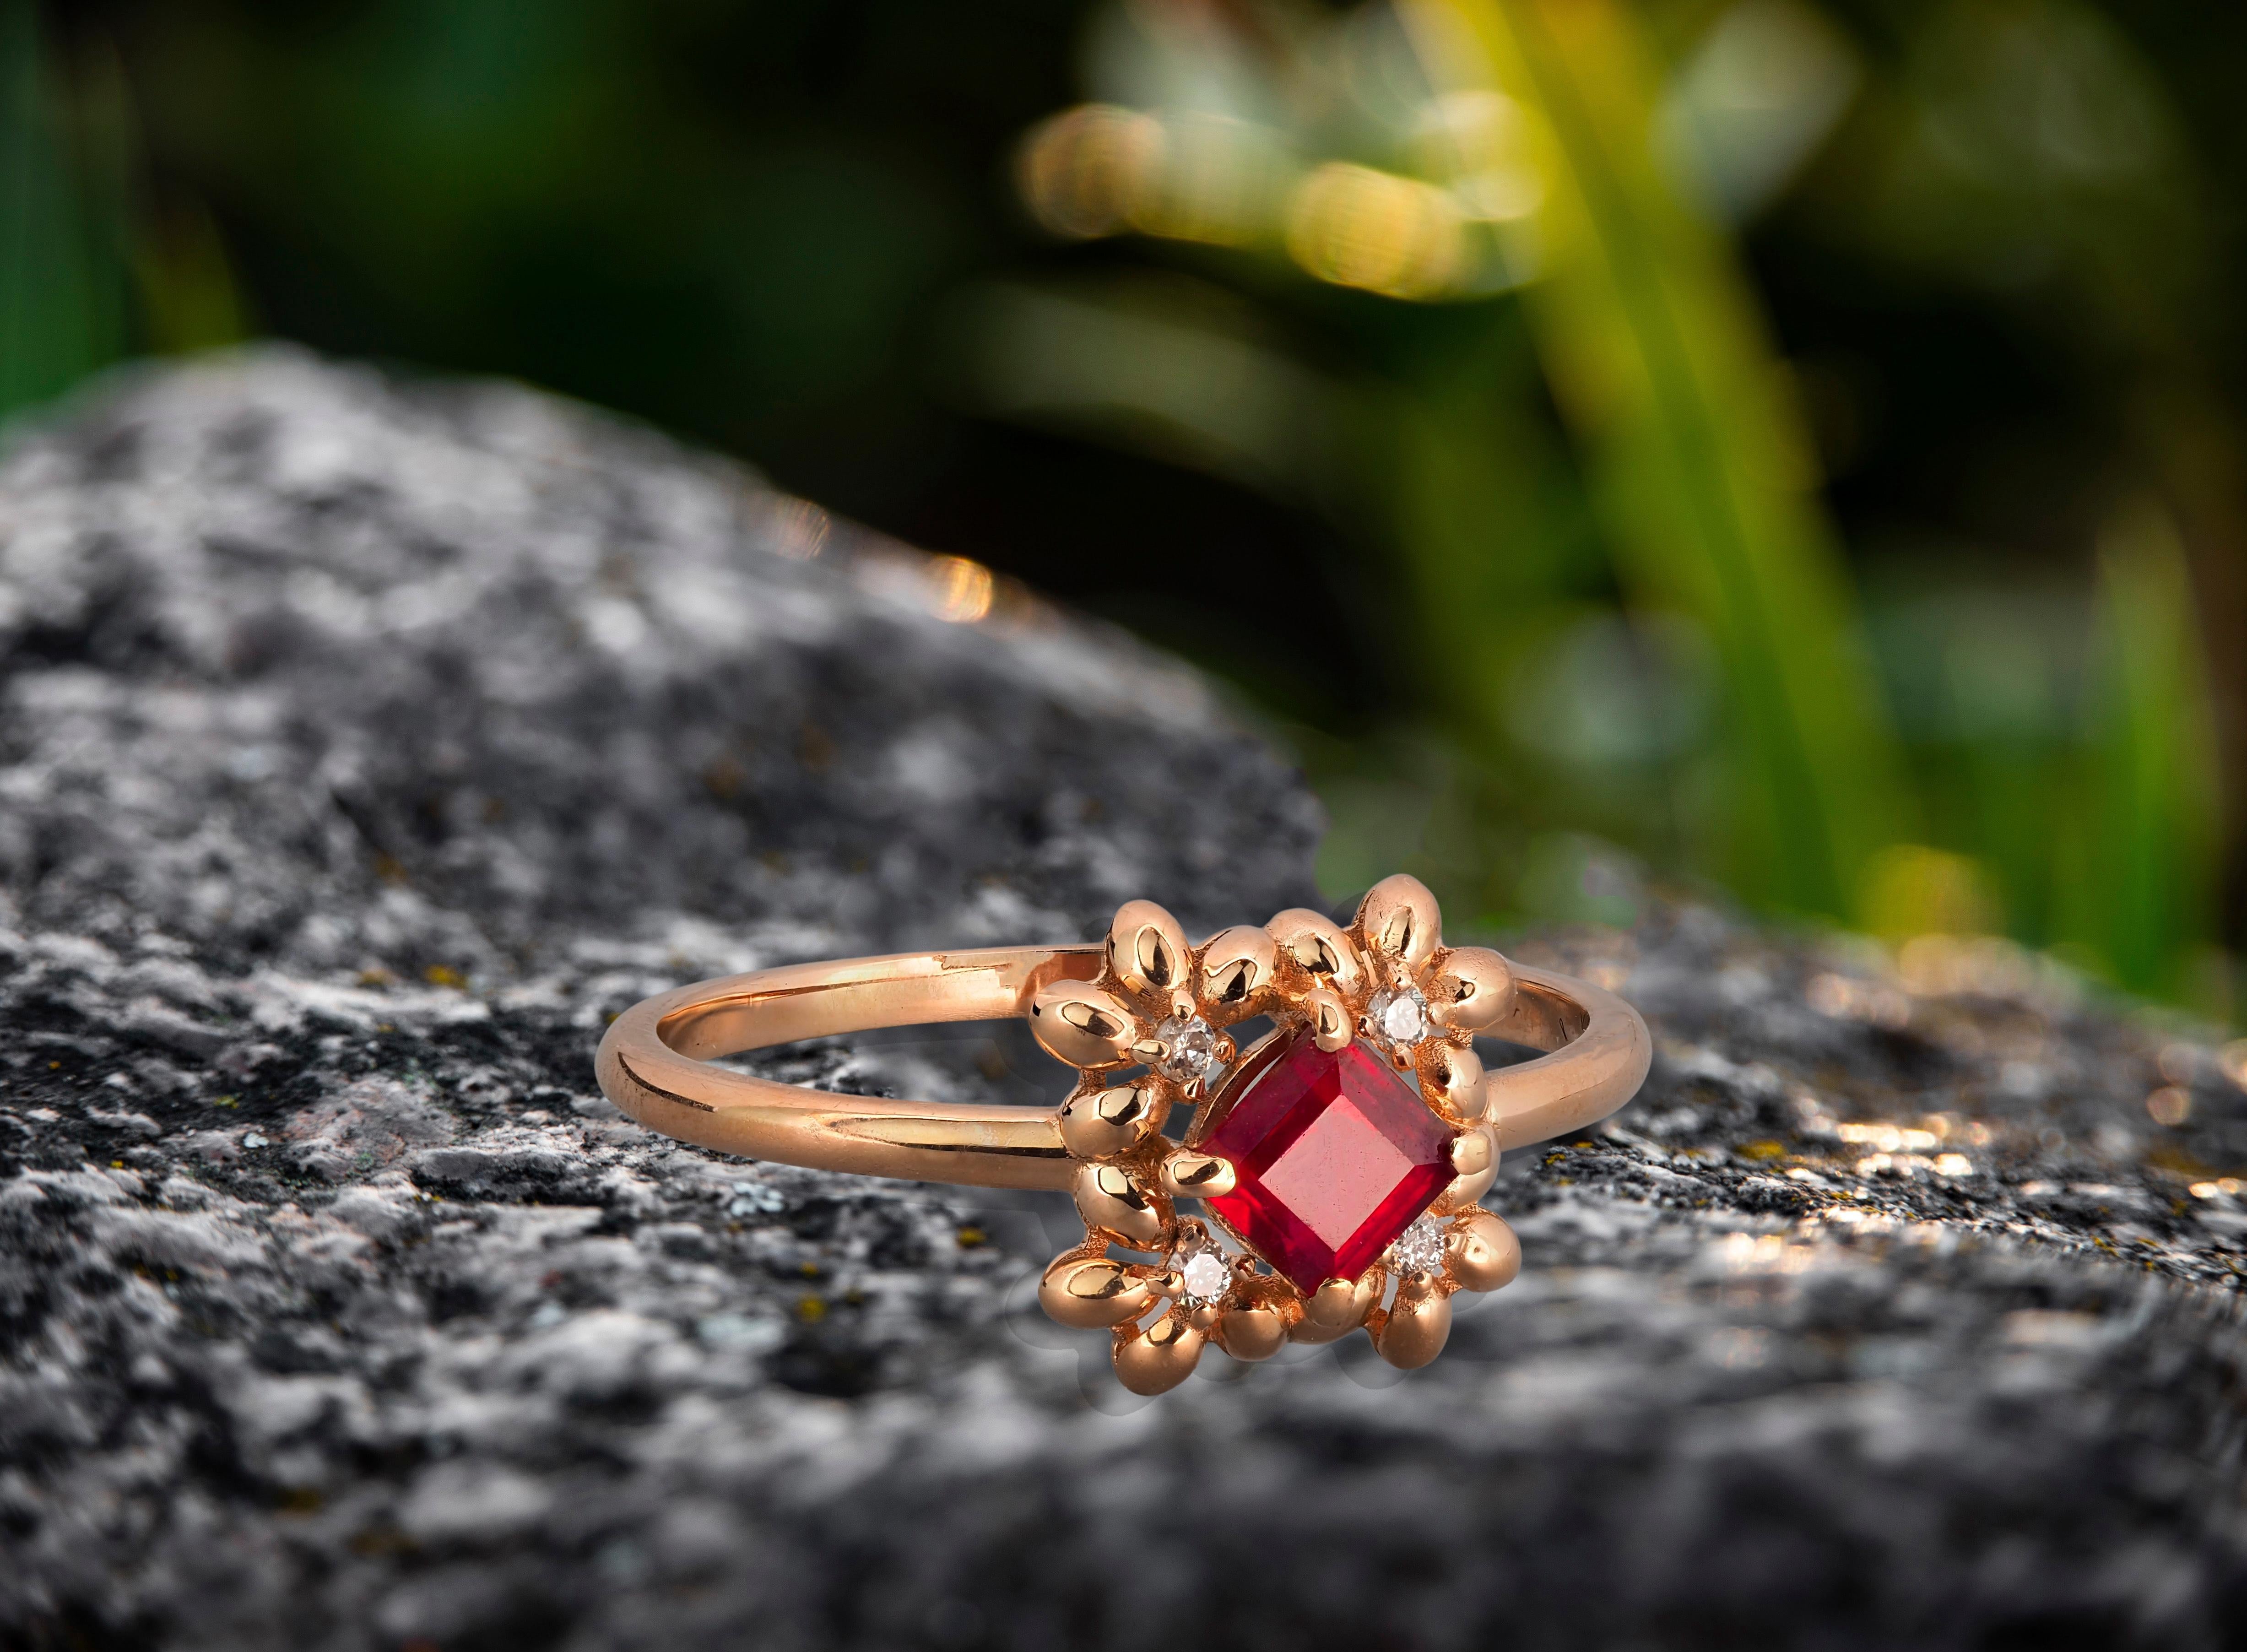 For Sale:  14 karat Gold Ring with Ruby and Diamonds 8